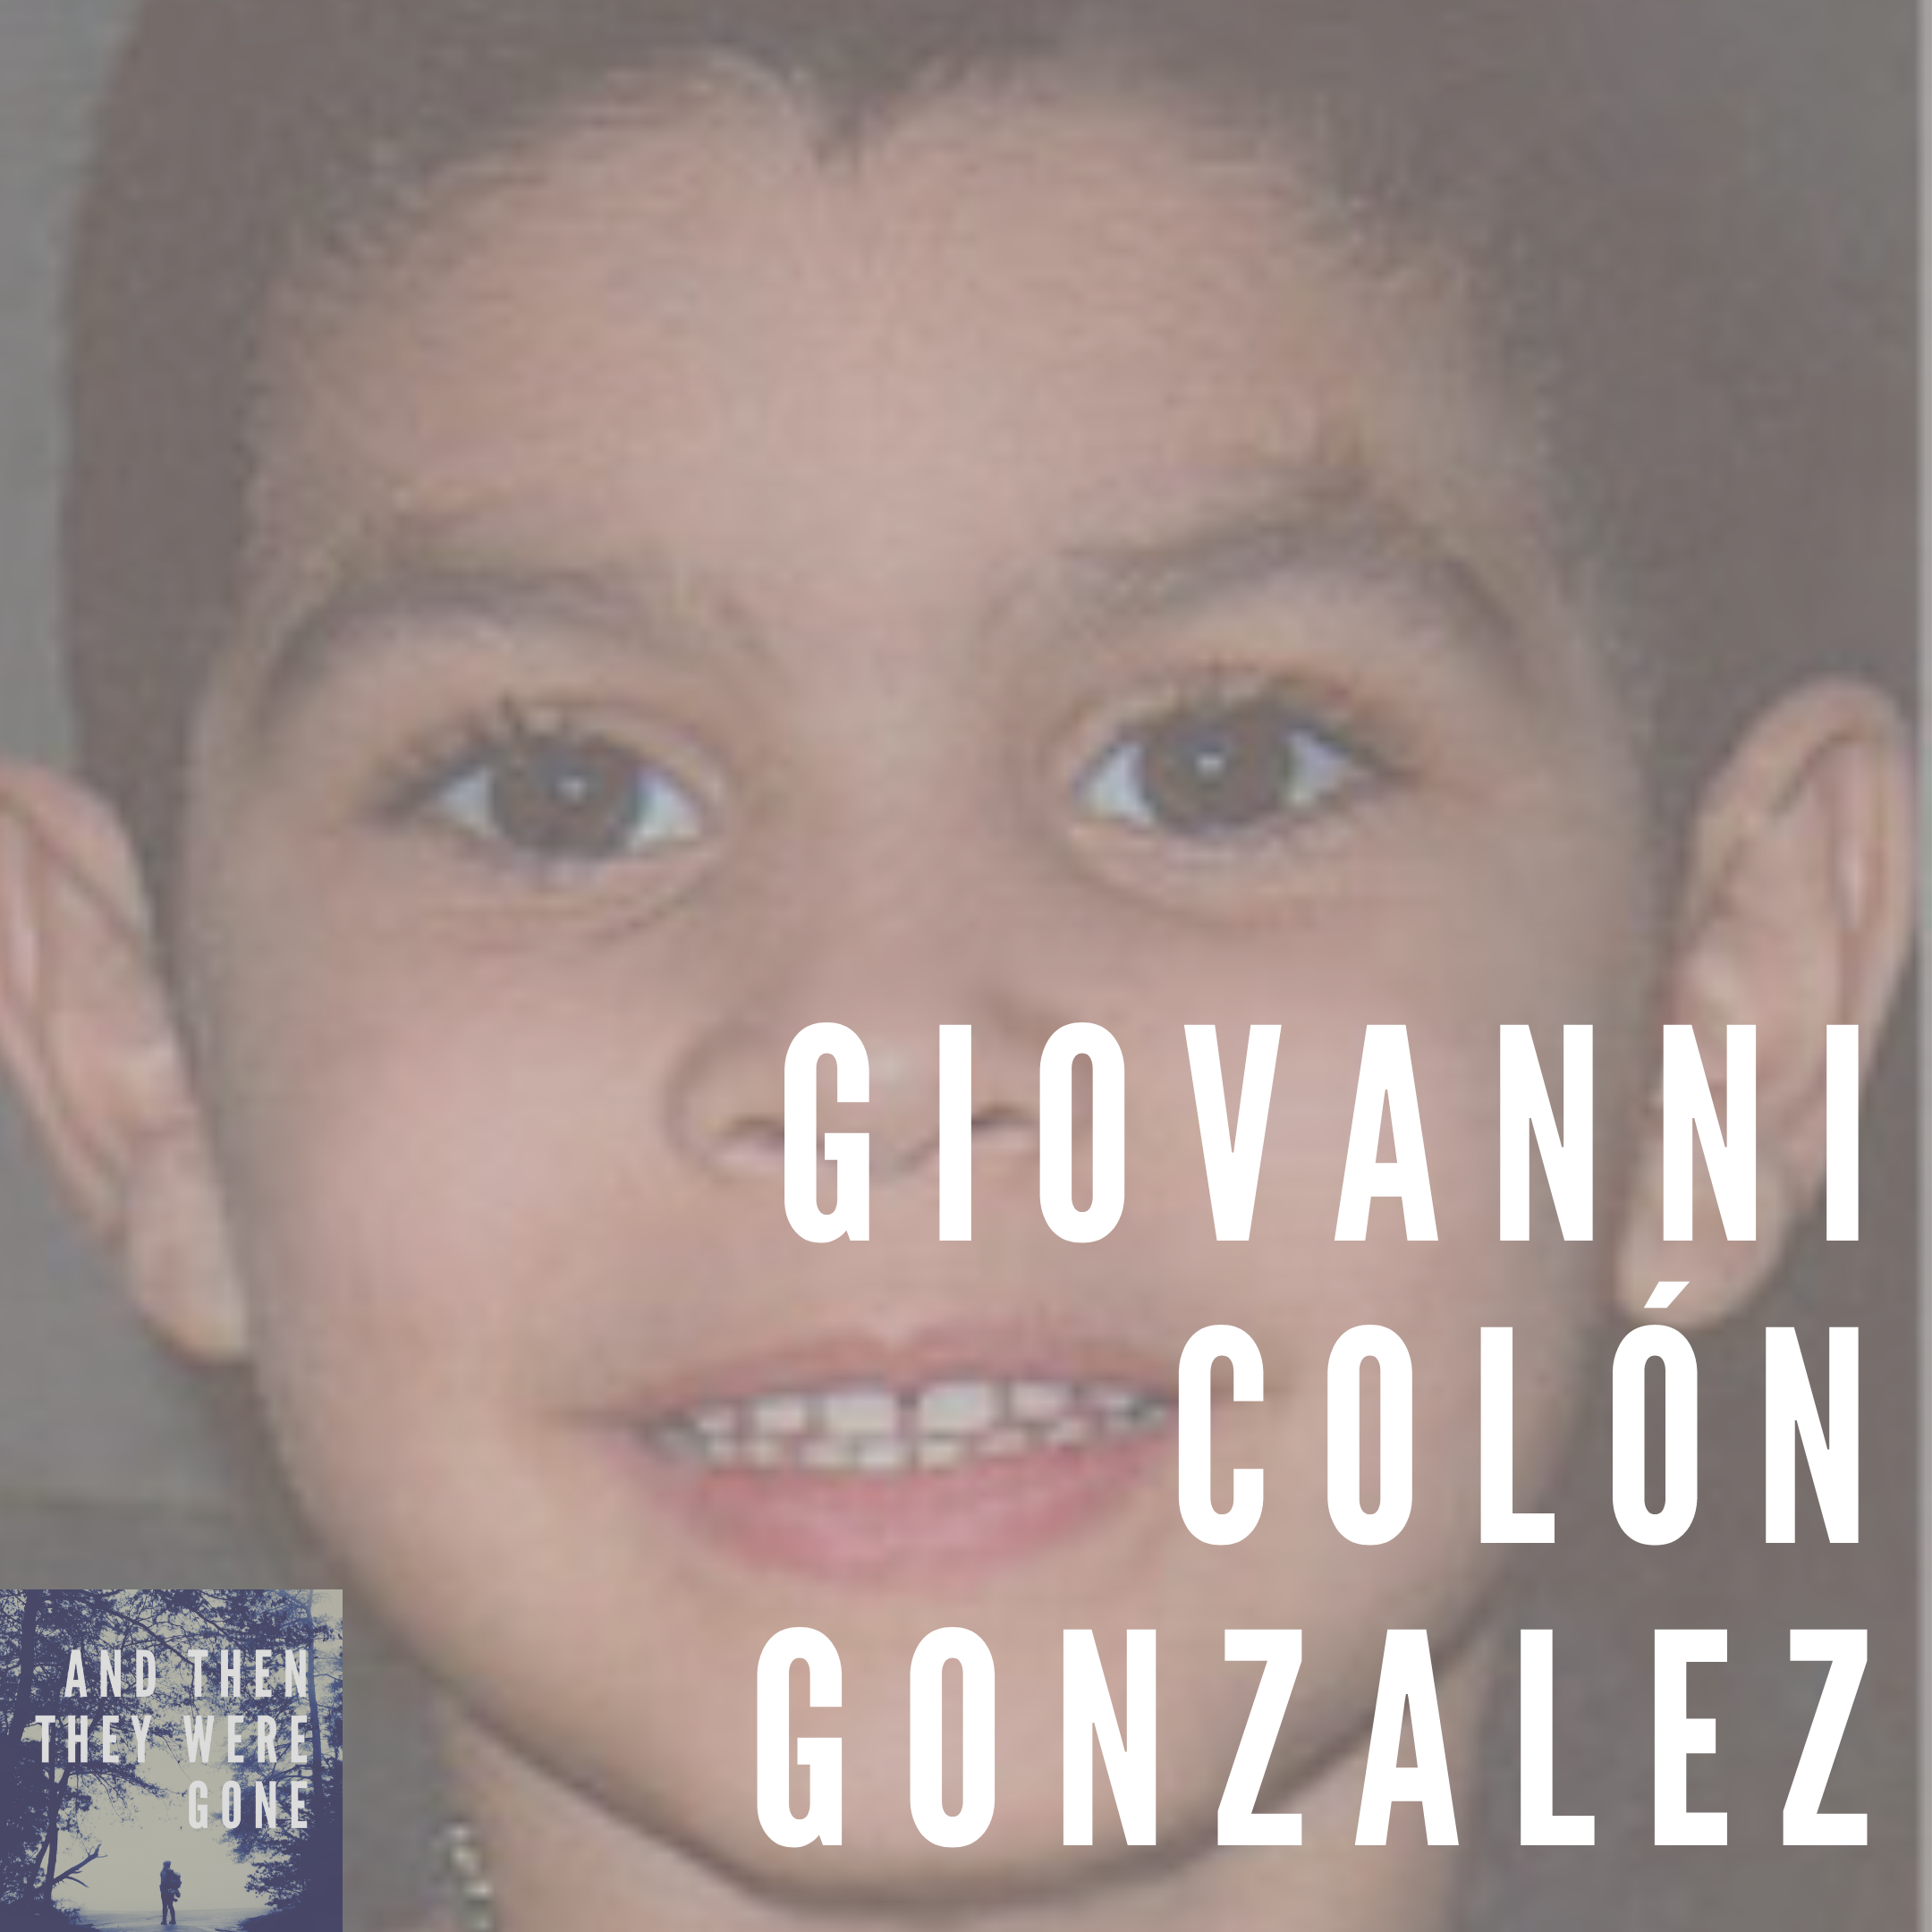 Giovanni Colon Gonzalez has been missing since 8/17/08 from Lynn, MA